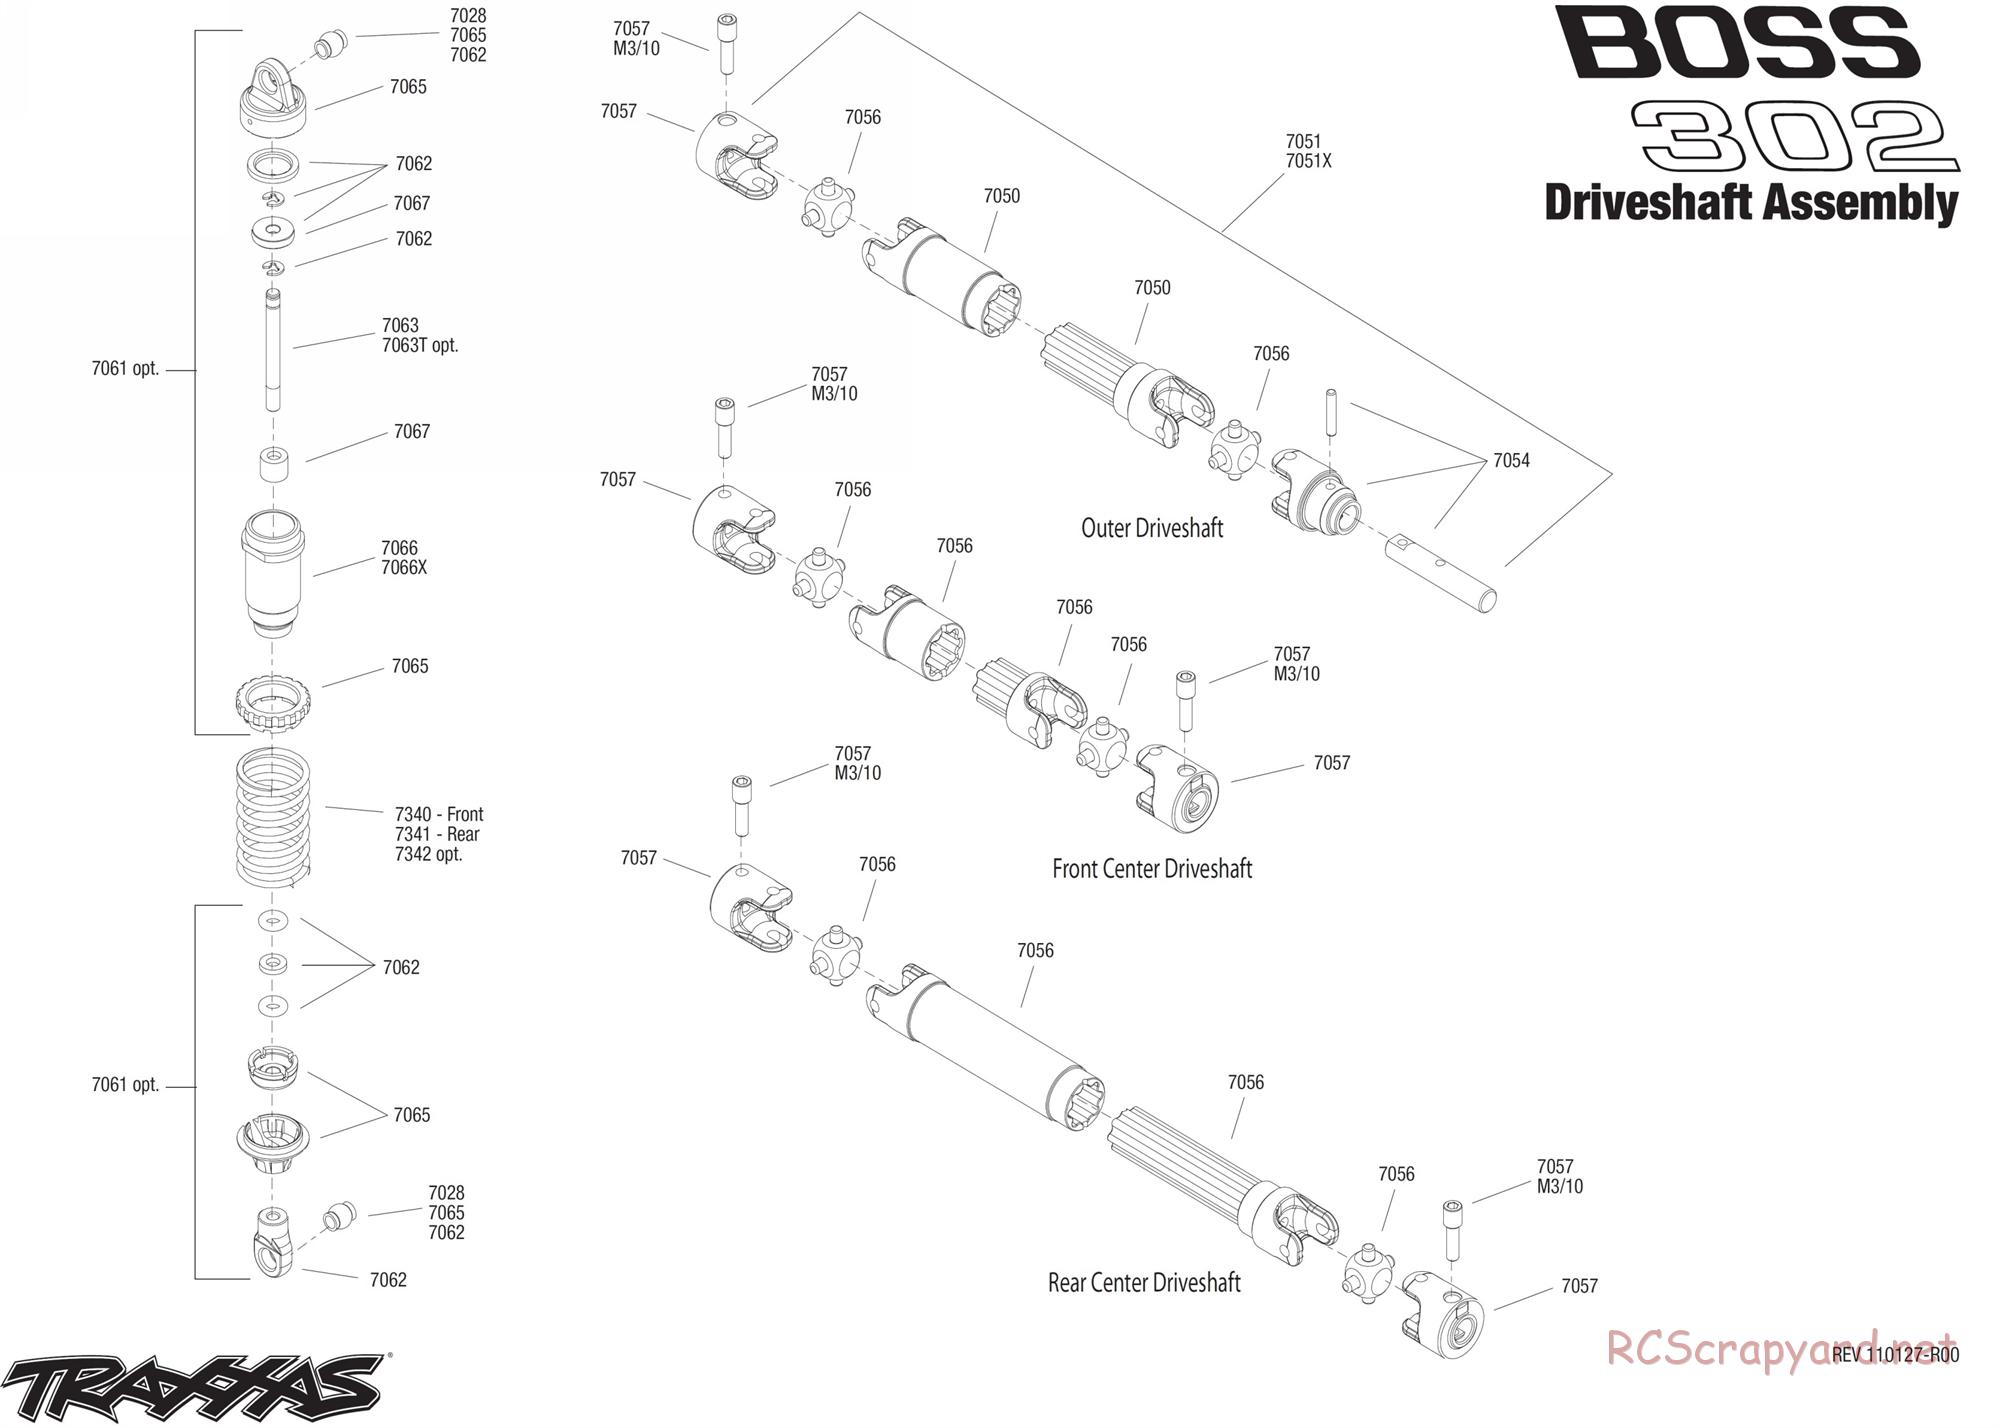 Traxxas - 1/16 Ford Mustang Boss 302 (2011) - Exploded Views - Page 2